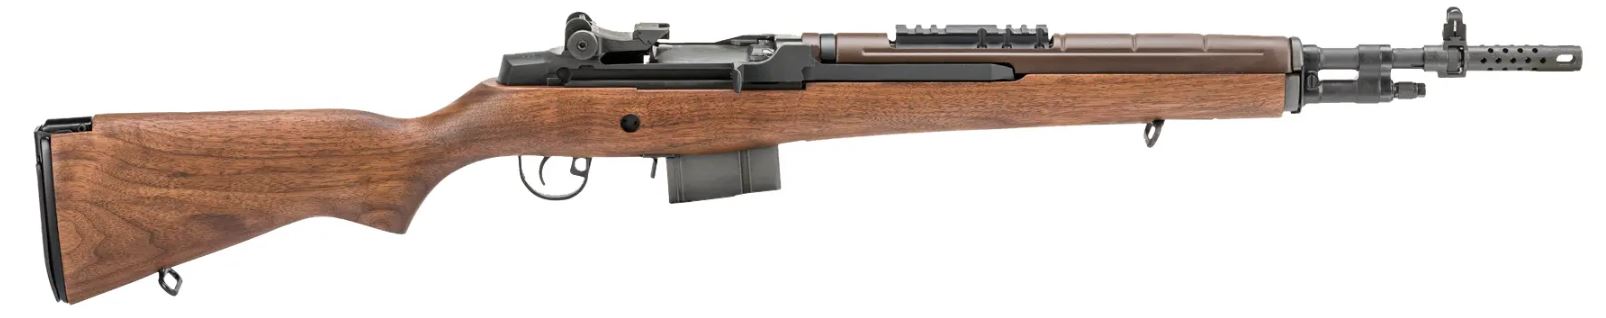 Springfield Armory M1A Scout Squad Walnuss